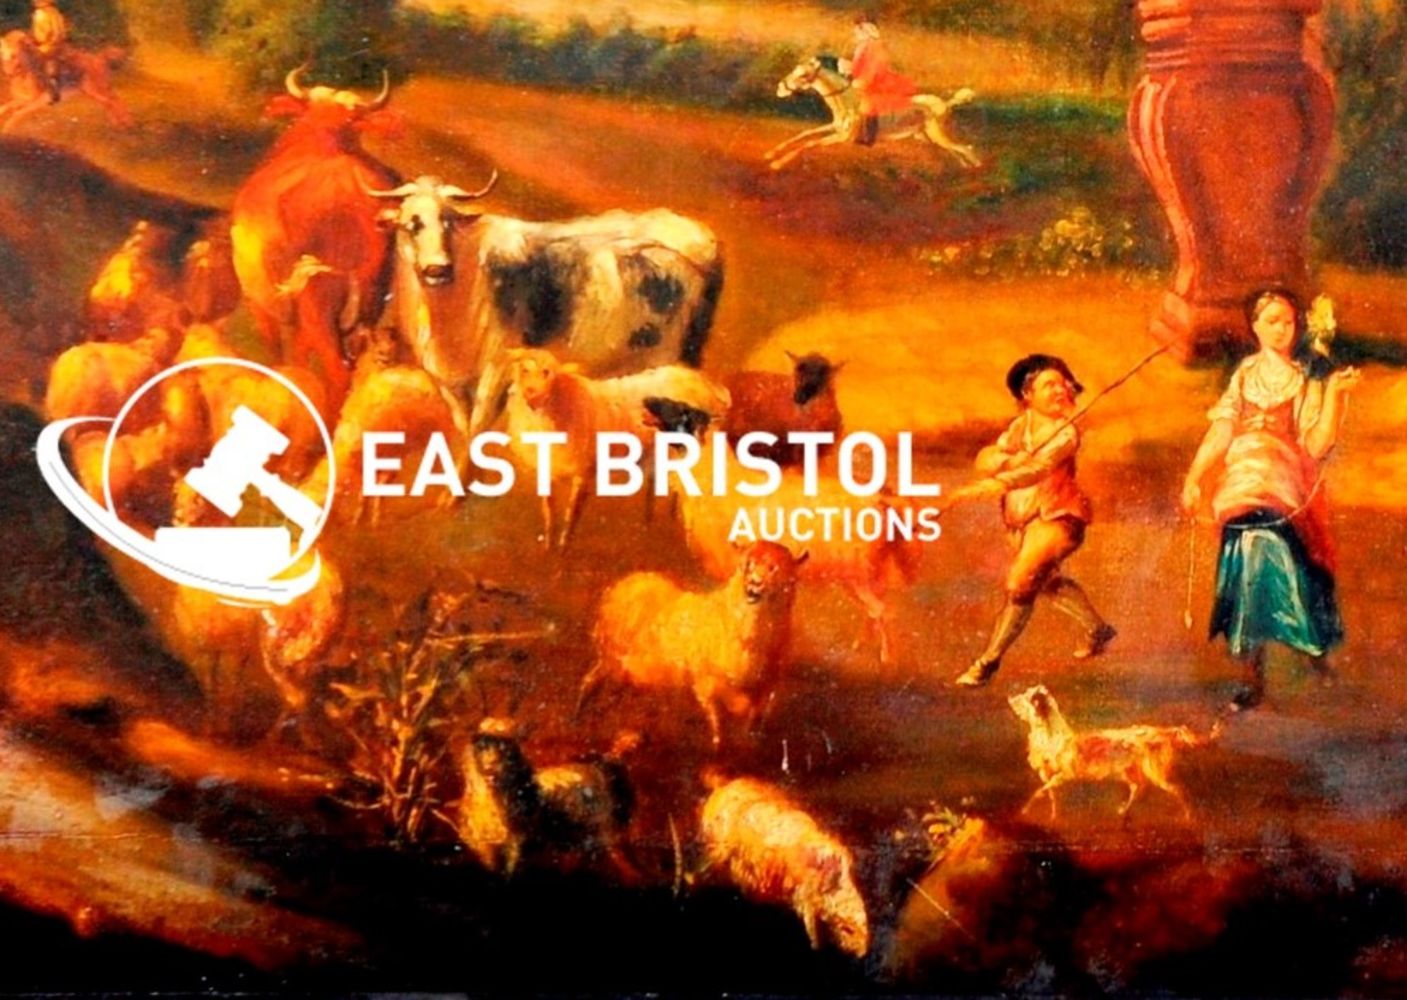 Fine Art, Antiques & Wine - Worldwide Postage, Packing & Delivery Available see www.eastbristol.co.uk